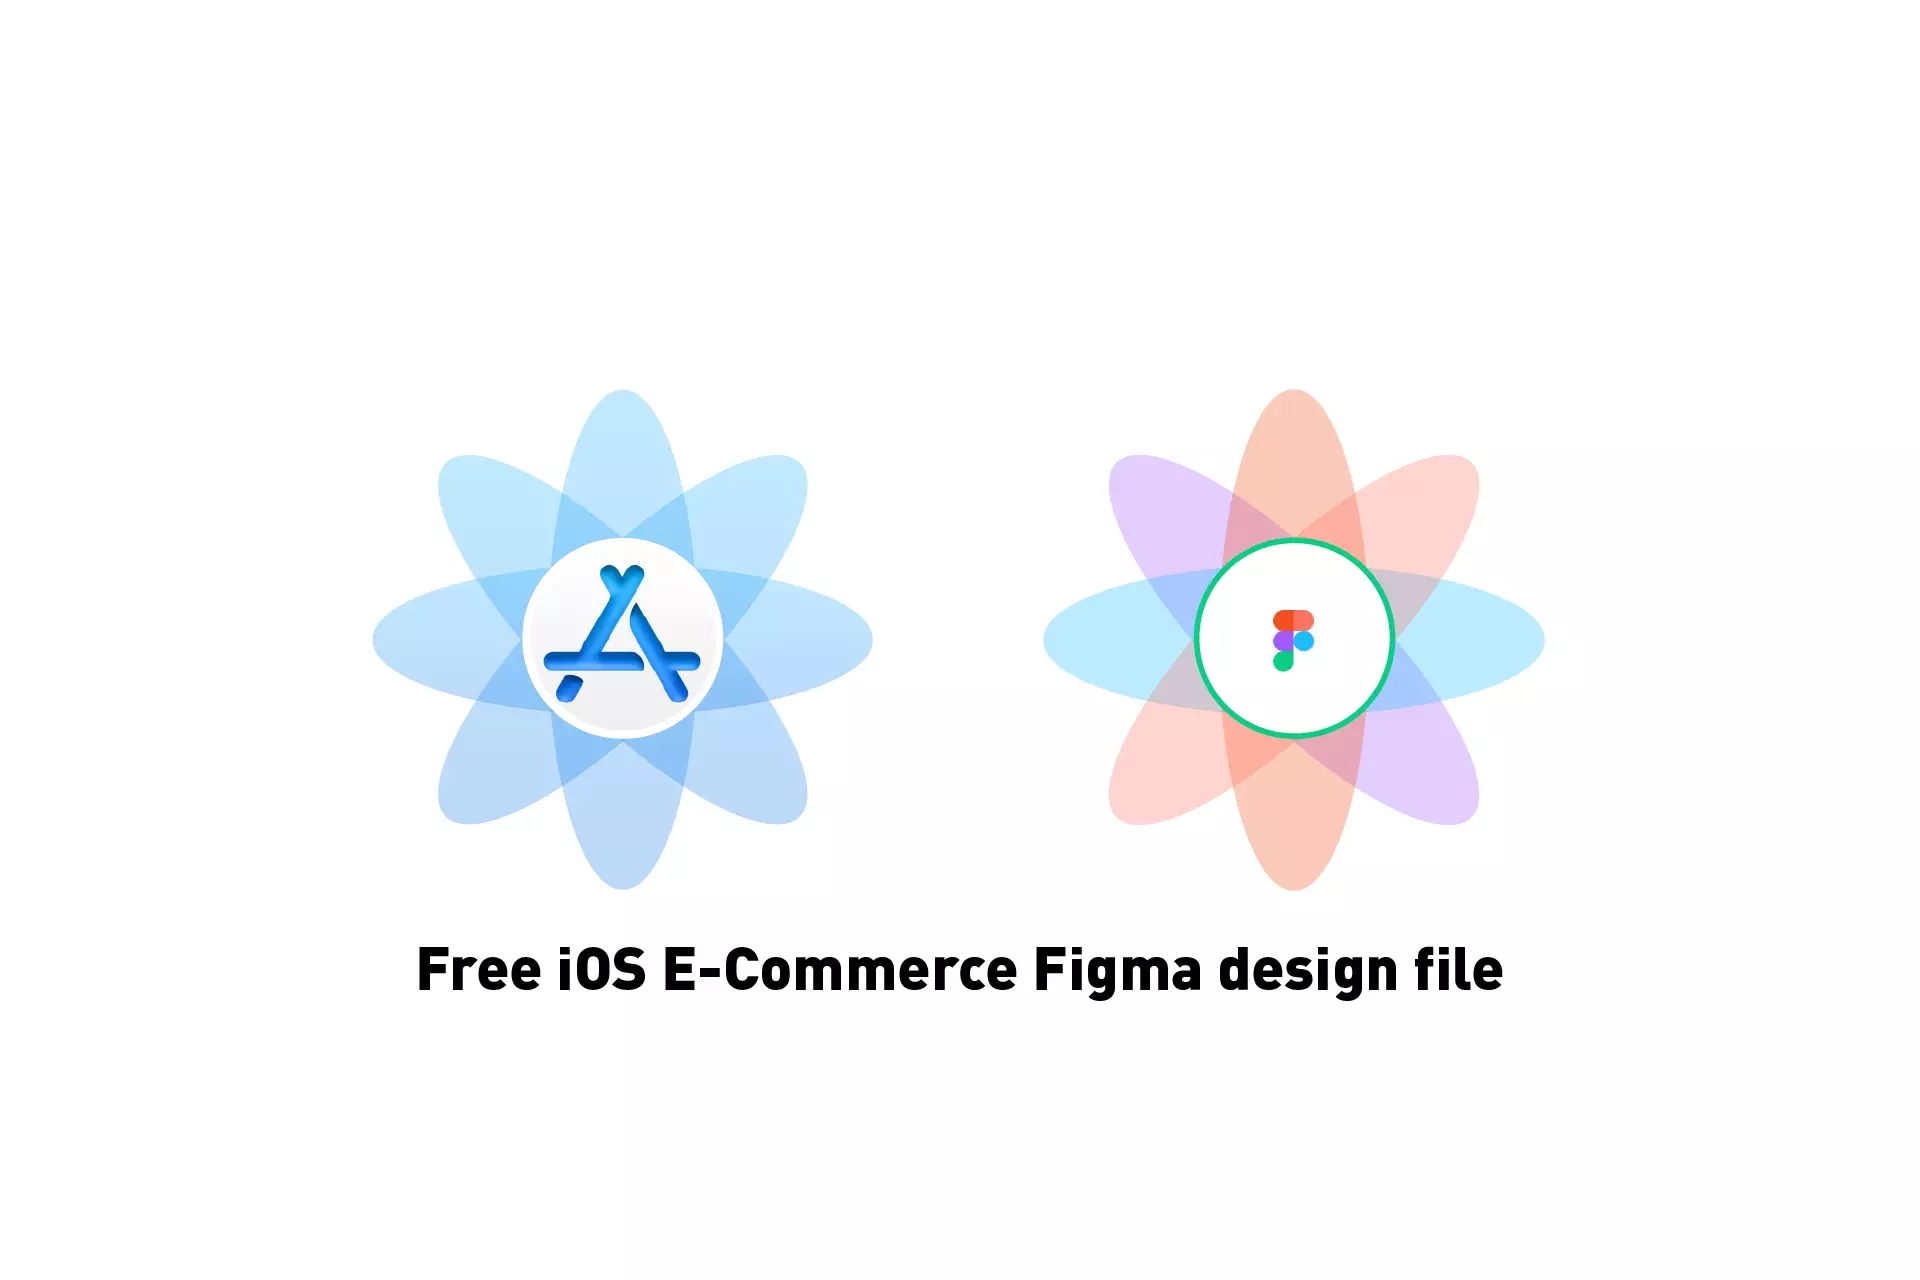 Two flowers that represent Apple App Store Connect & Figma side by side, beneath them sits the text "Free iOS E-Commerce Figma design file."